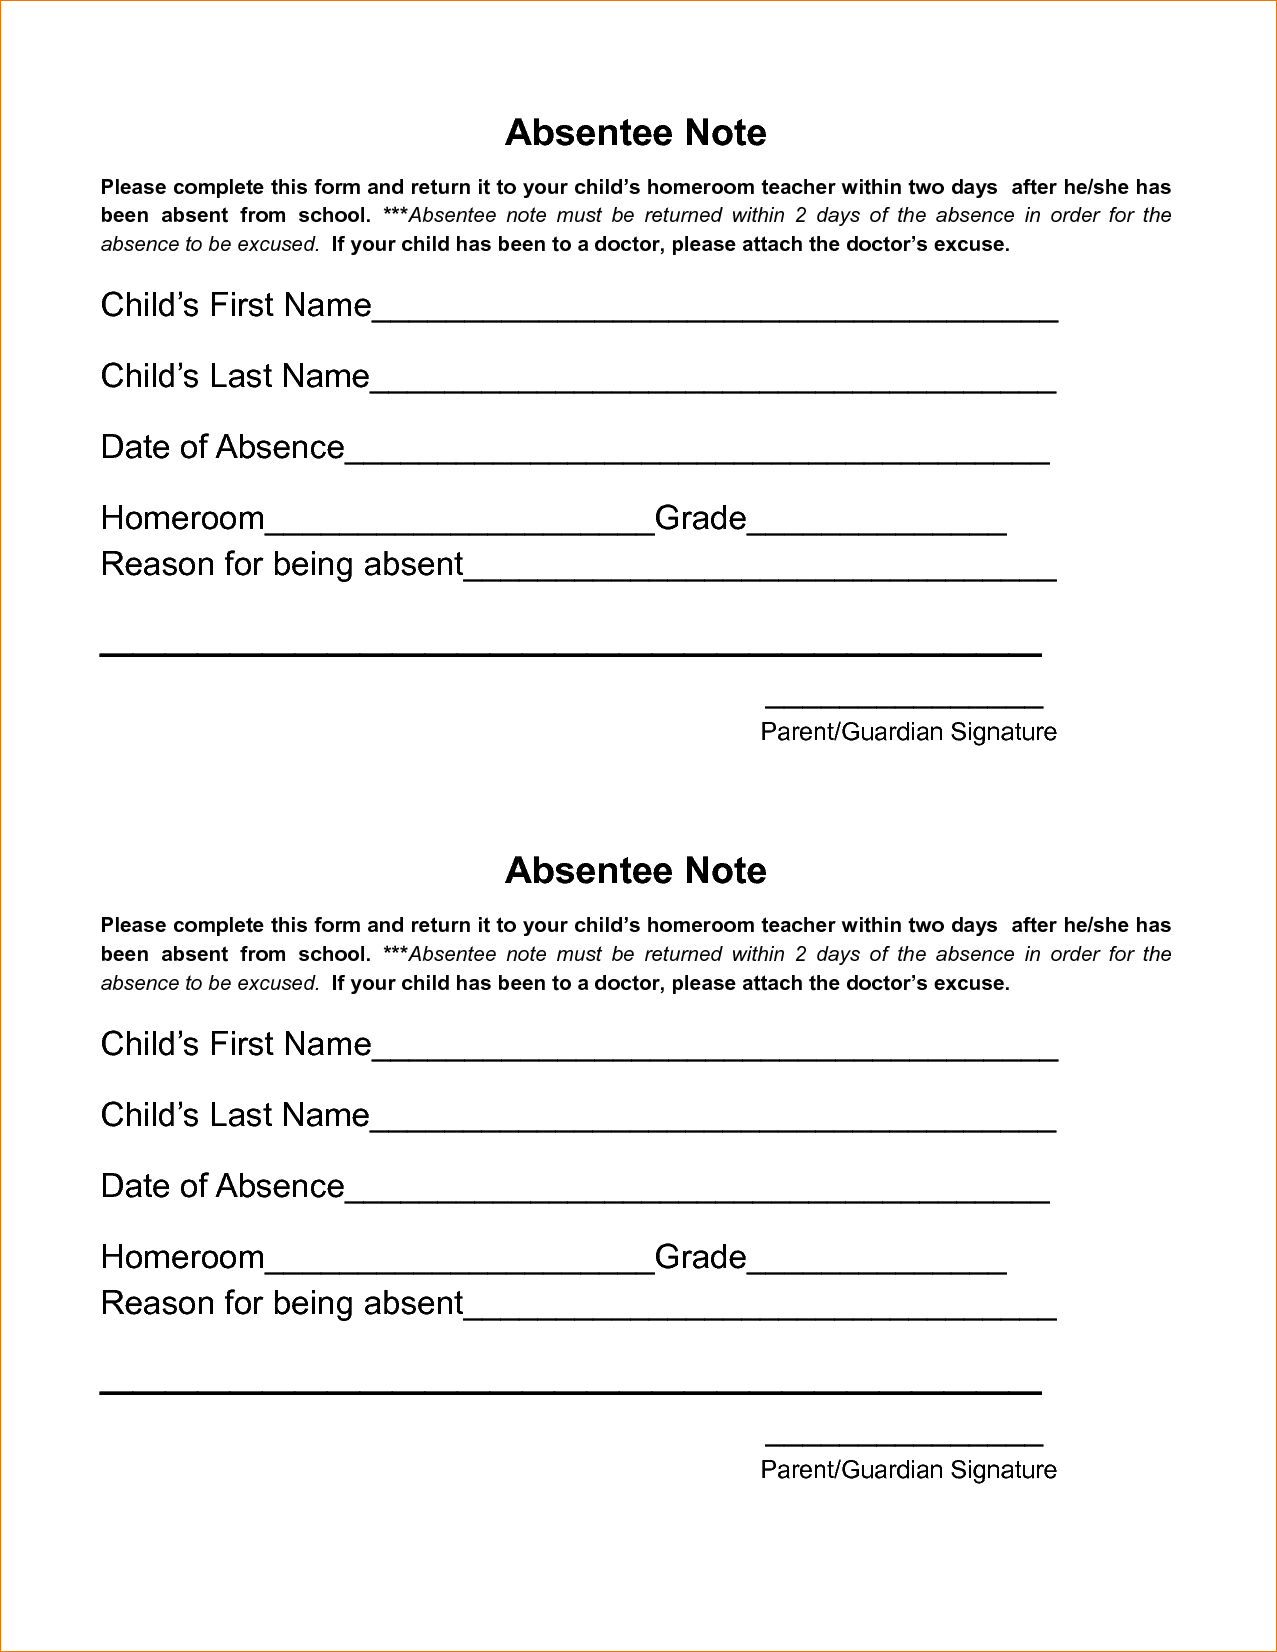 8 Free Printable Doctors Excuse For Workagenda Template Sample - Free Printable Doctor Excuse Notes